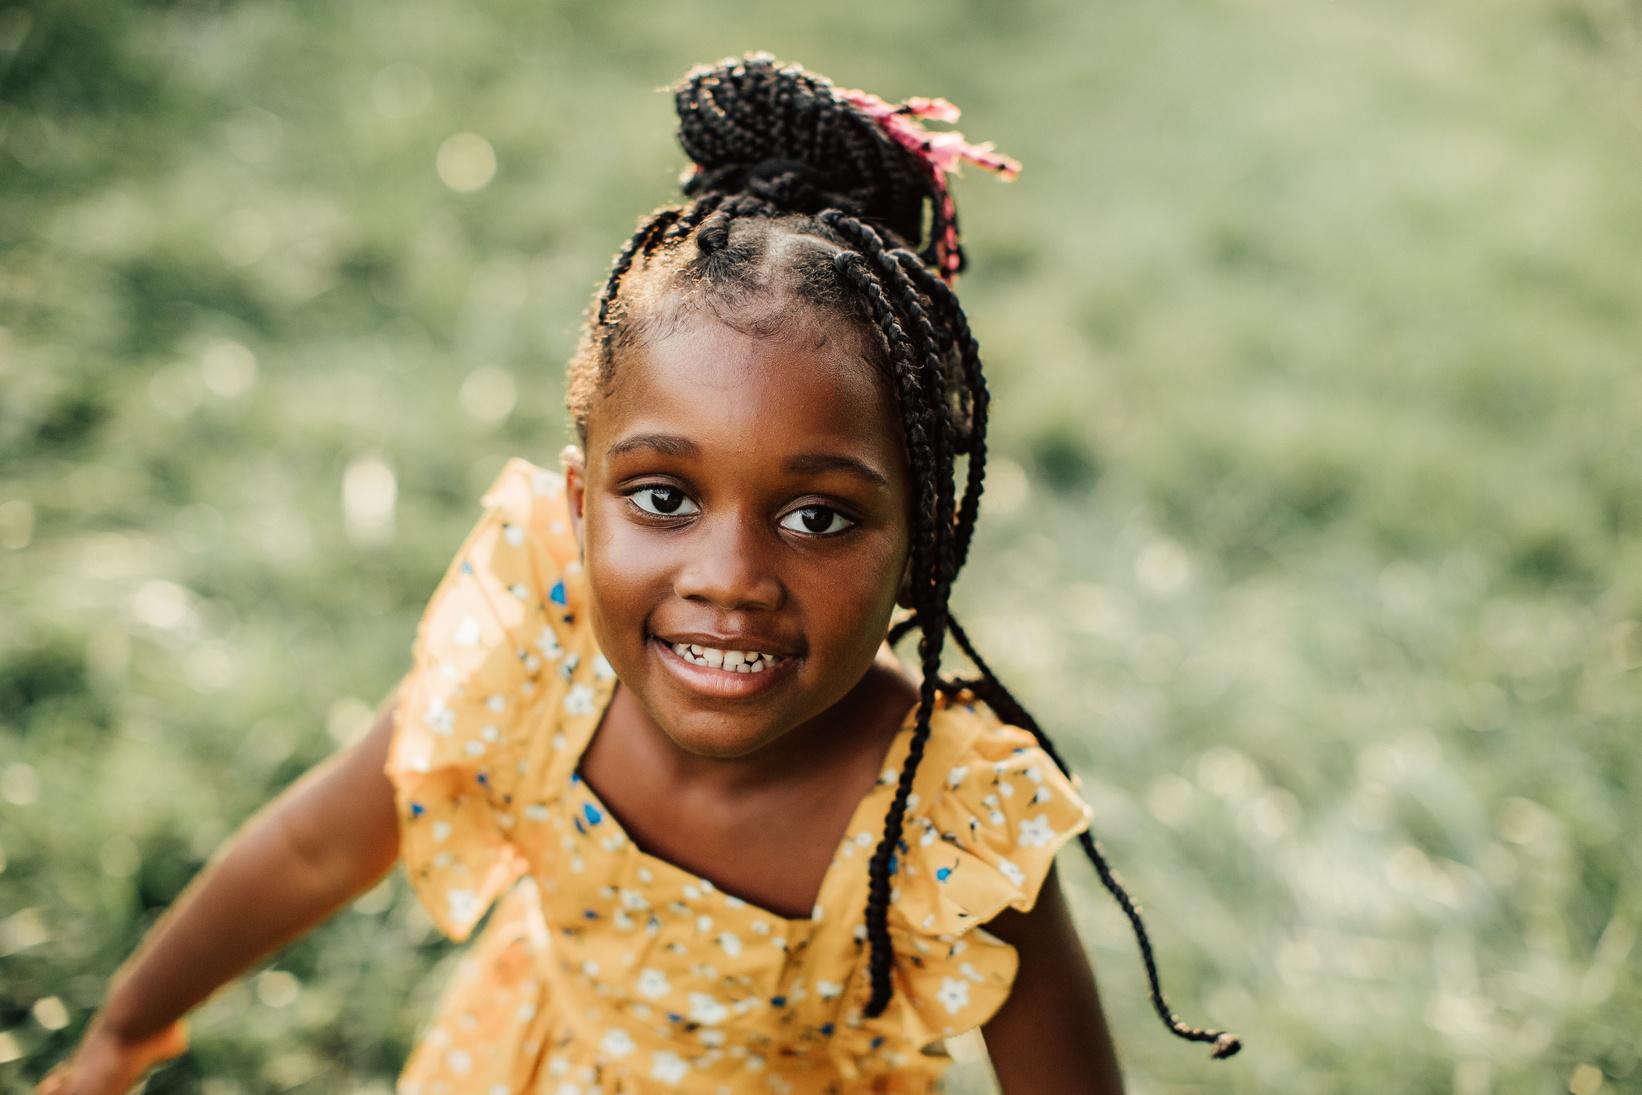 Portrait of  Smiling Child Outdoors 